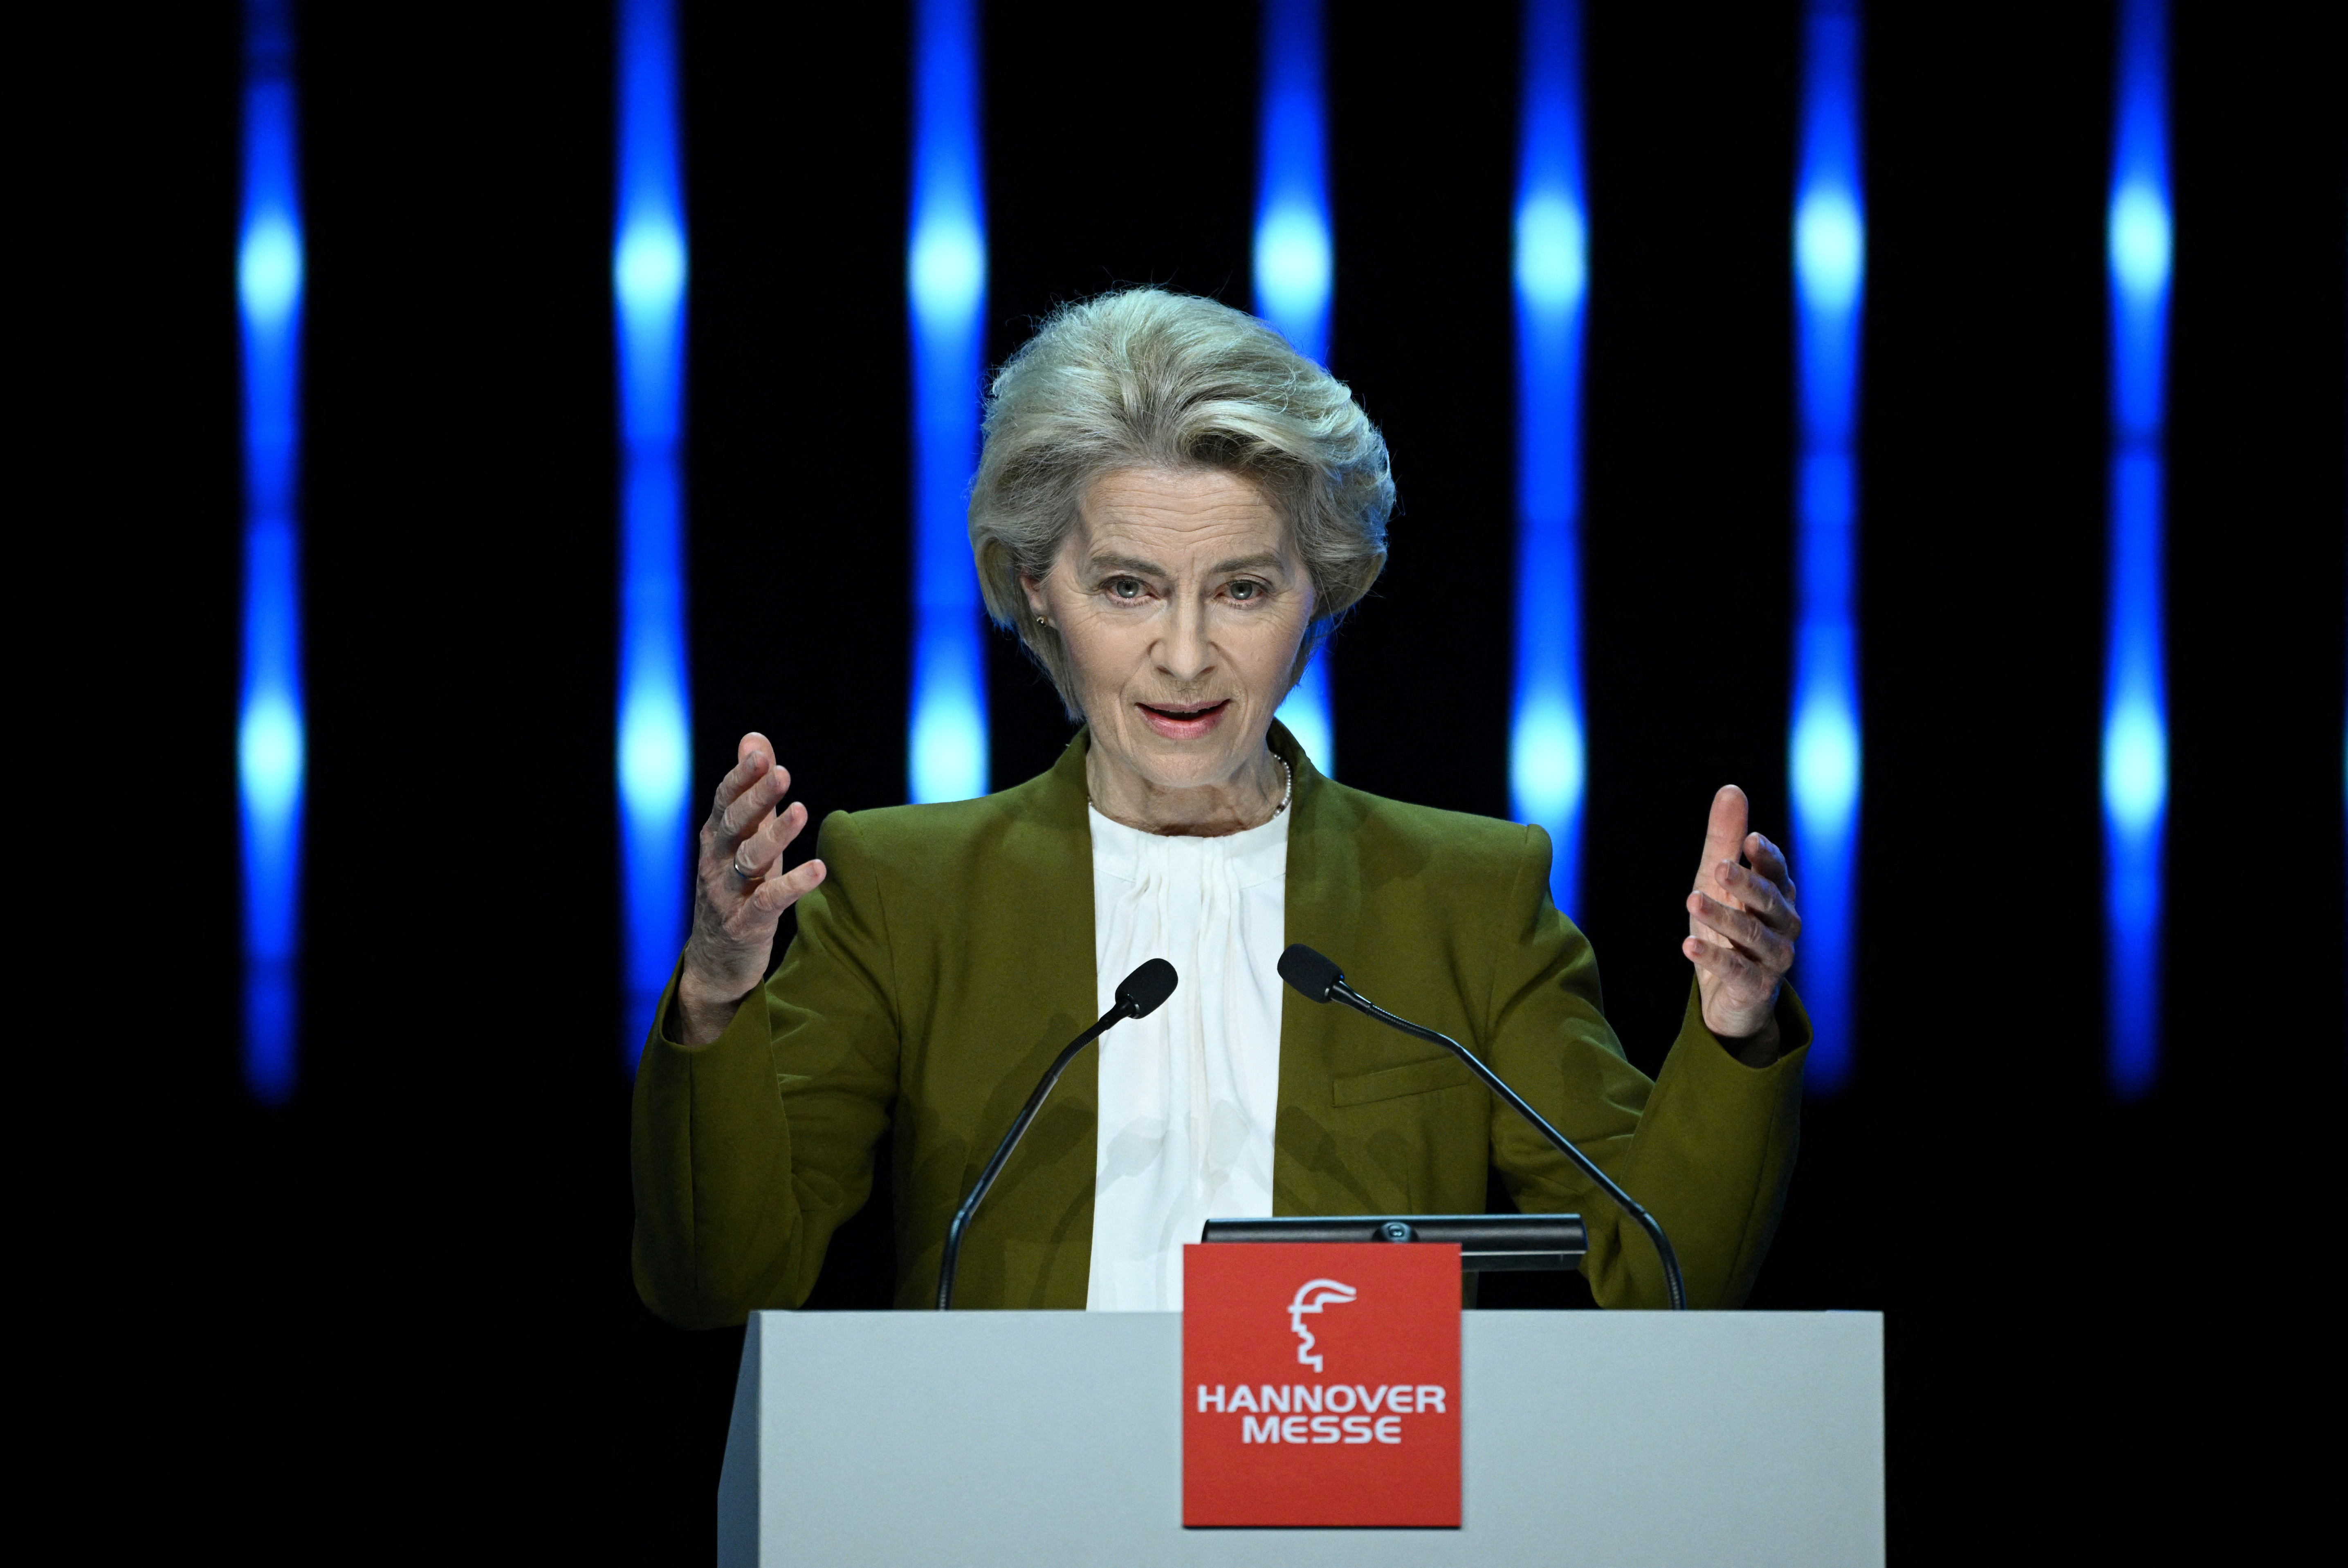 Germany's Chancellor Scholz, Norway's PM Store and European Commission President von der Leyen visit Hannover Messe